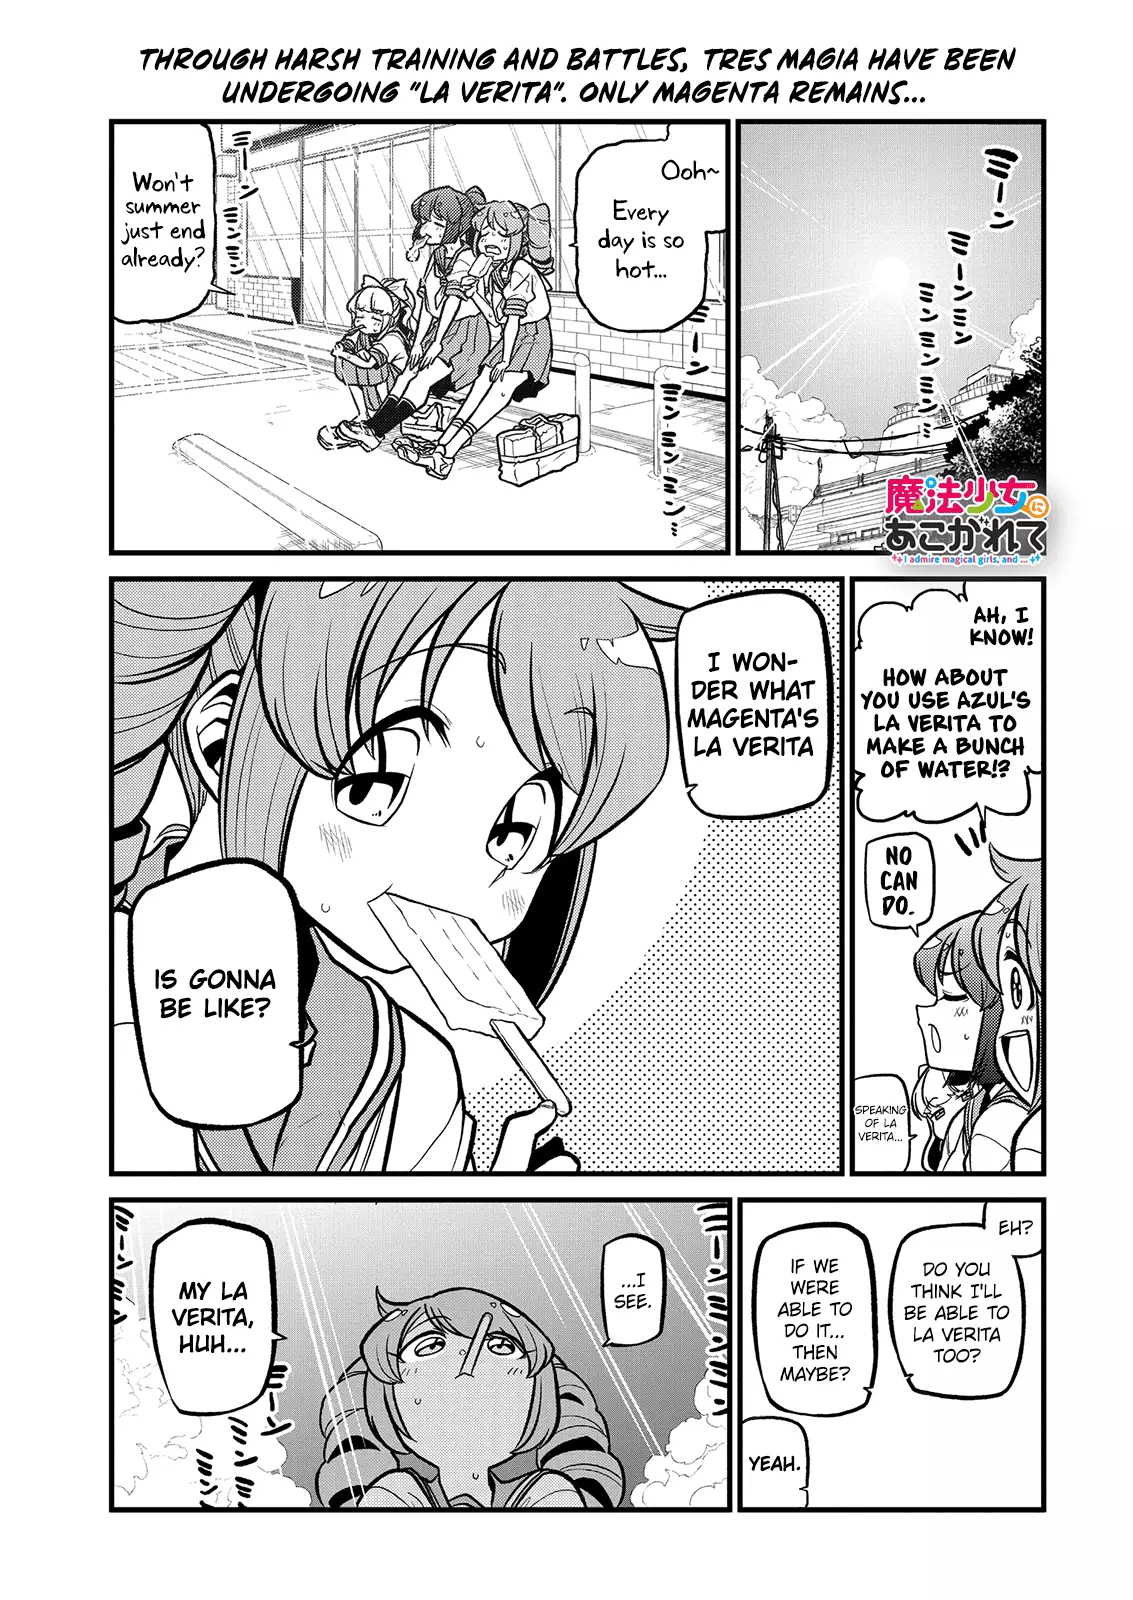 Looking Up To Magical Girls - 33 page 1-df059ba4